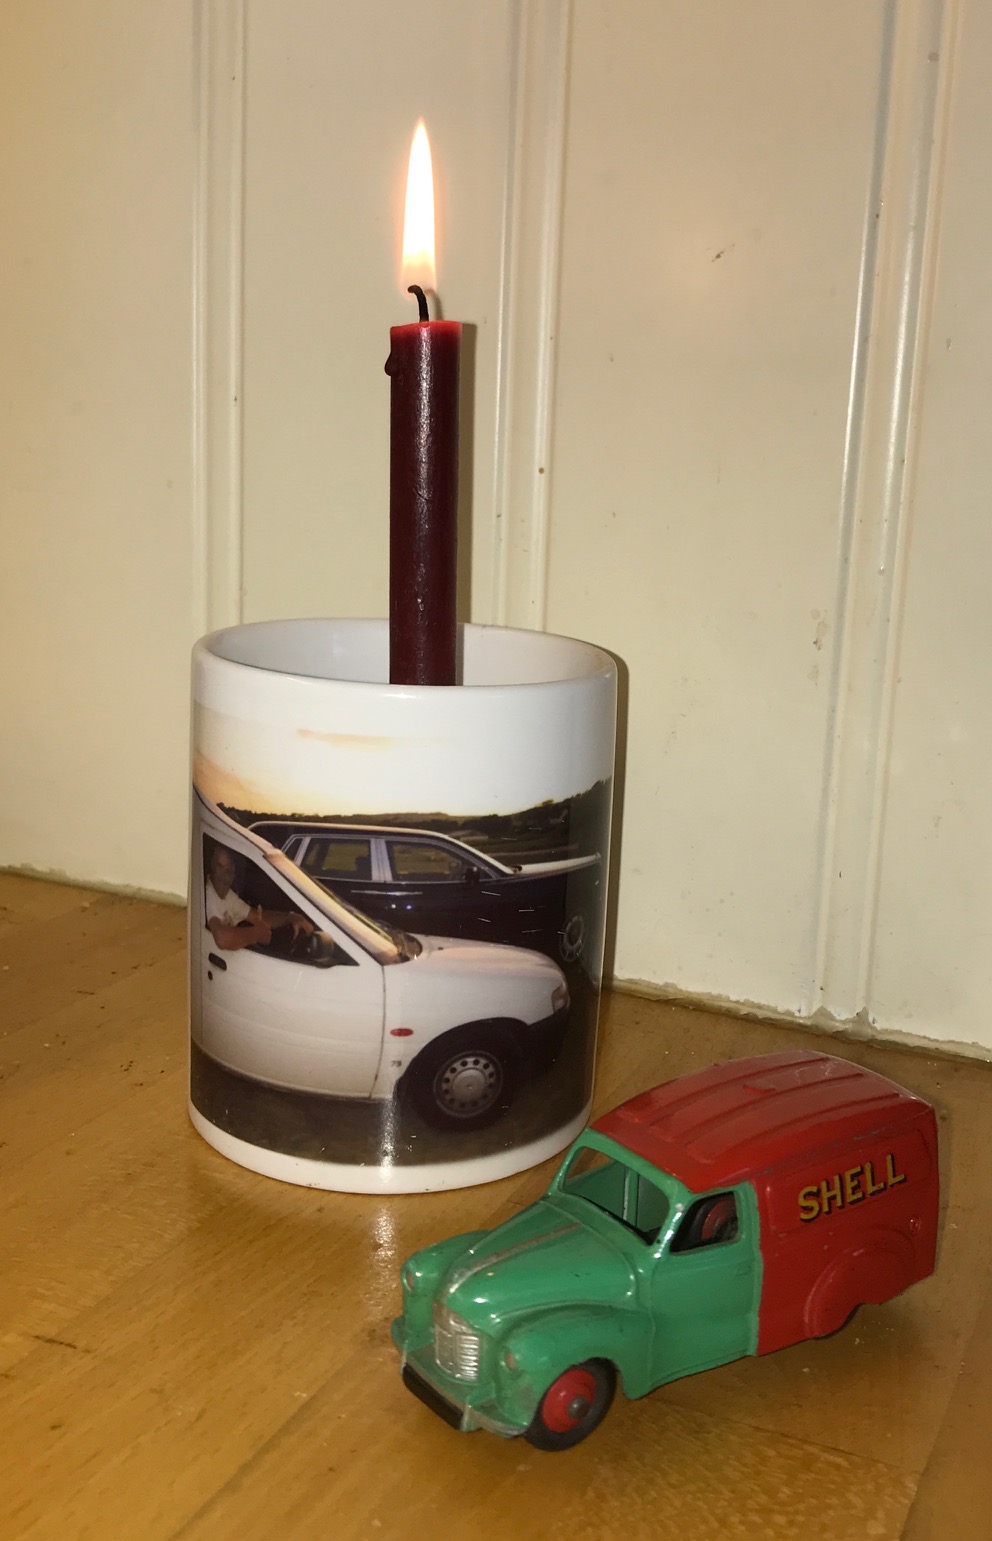 Little White Van: Lighting a Candle to Diddly: Candle in White Van Mug - and Dinky Toy.